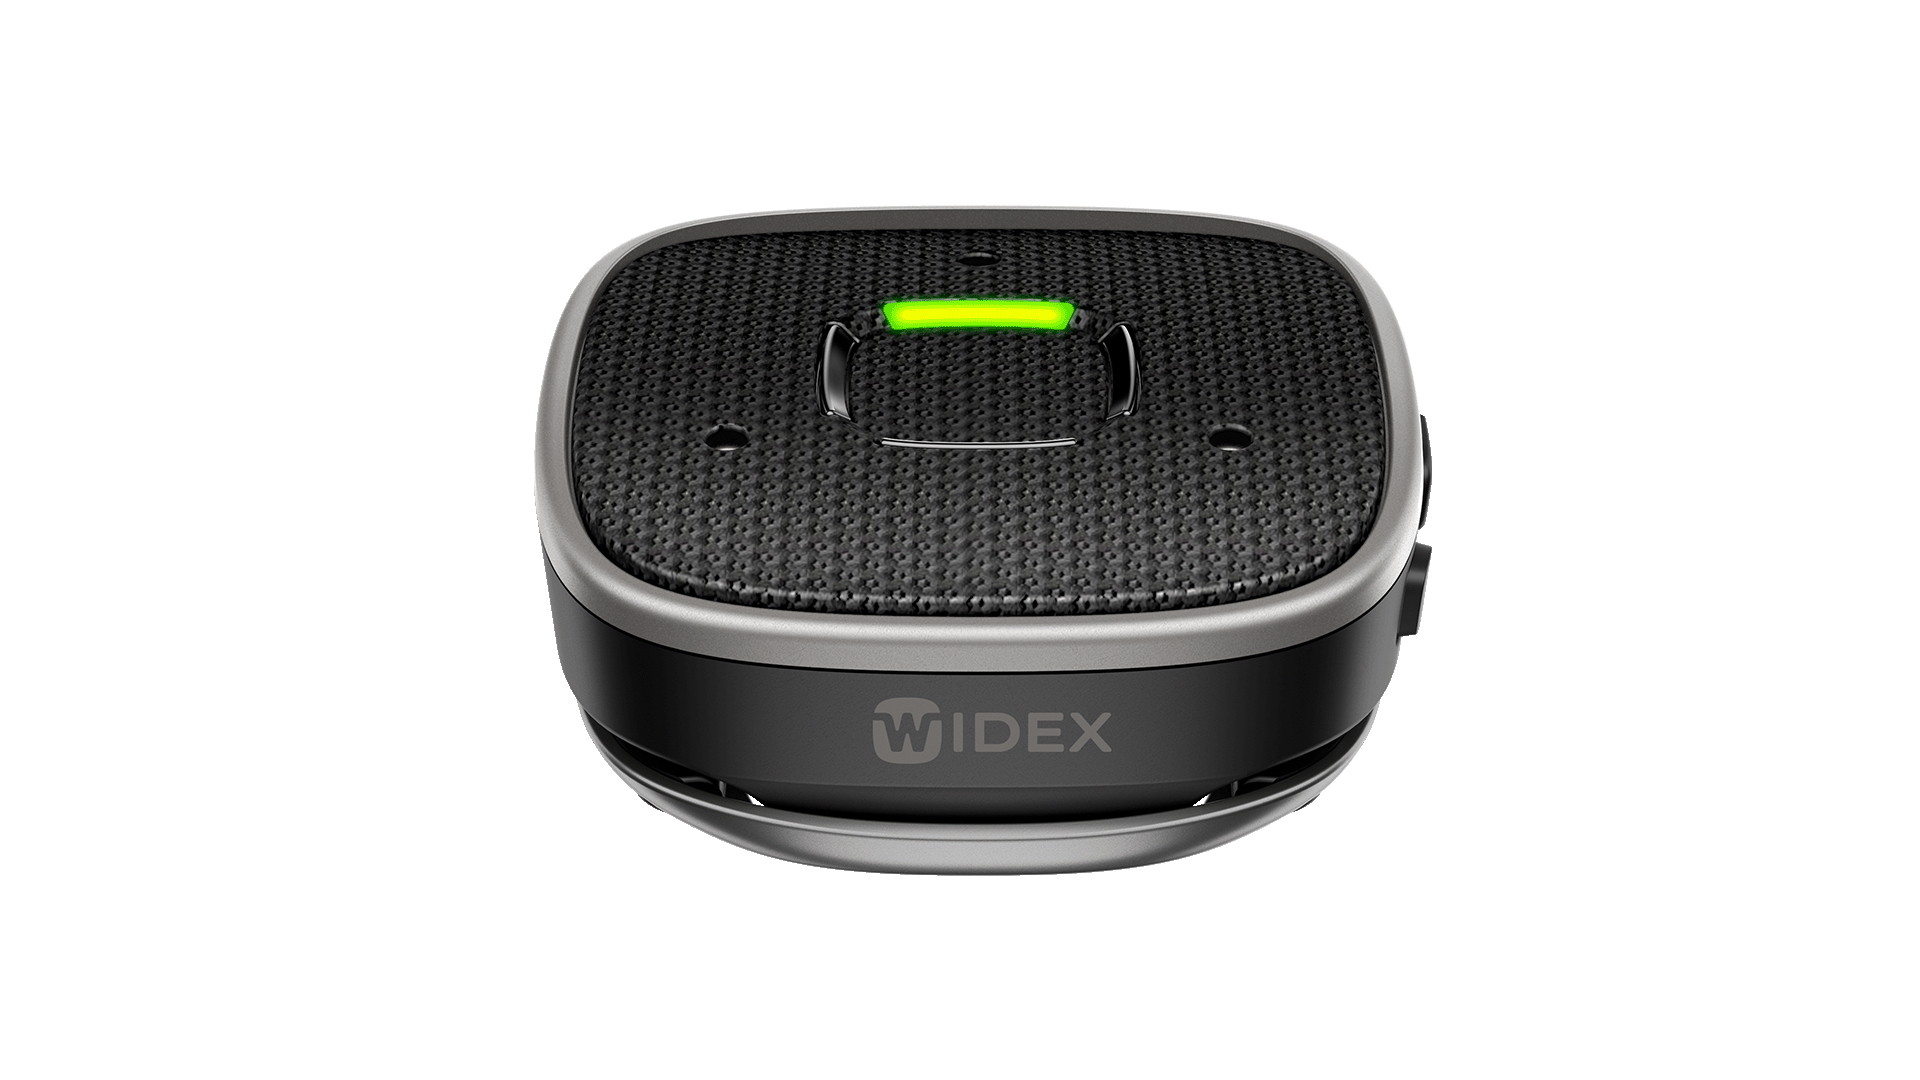 Widex Sound Assist remote control for hearing aids